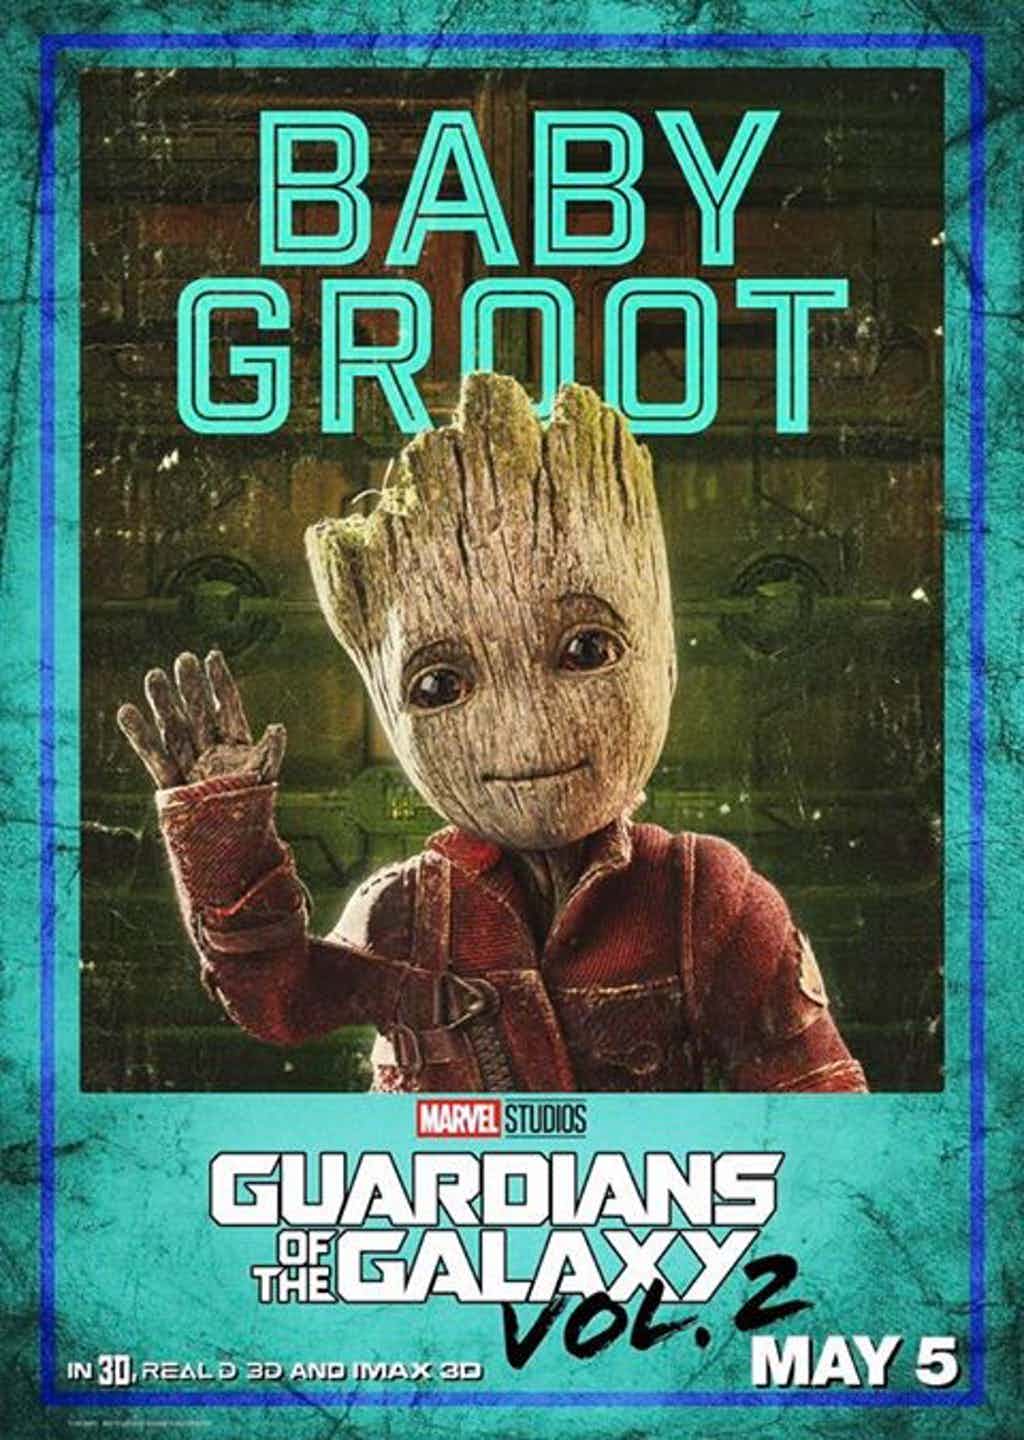 Guardians Of The Galaxy Vol. 2 Character Poster Groot of the Galaxy Photo